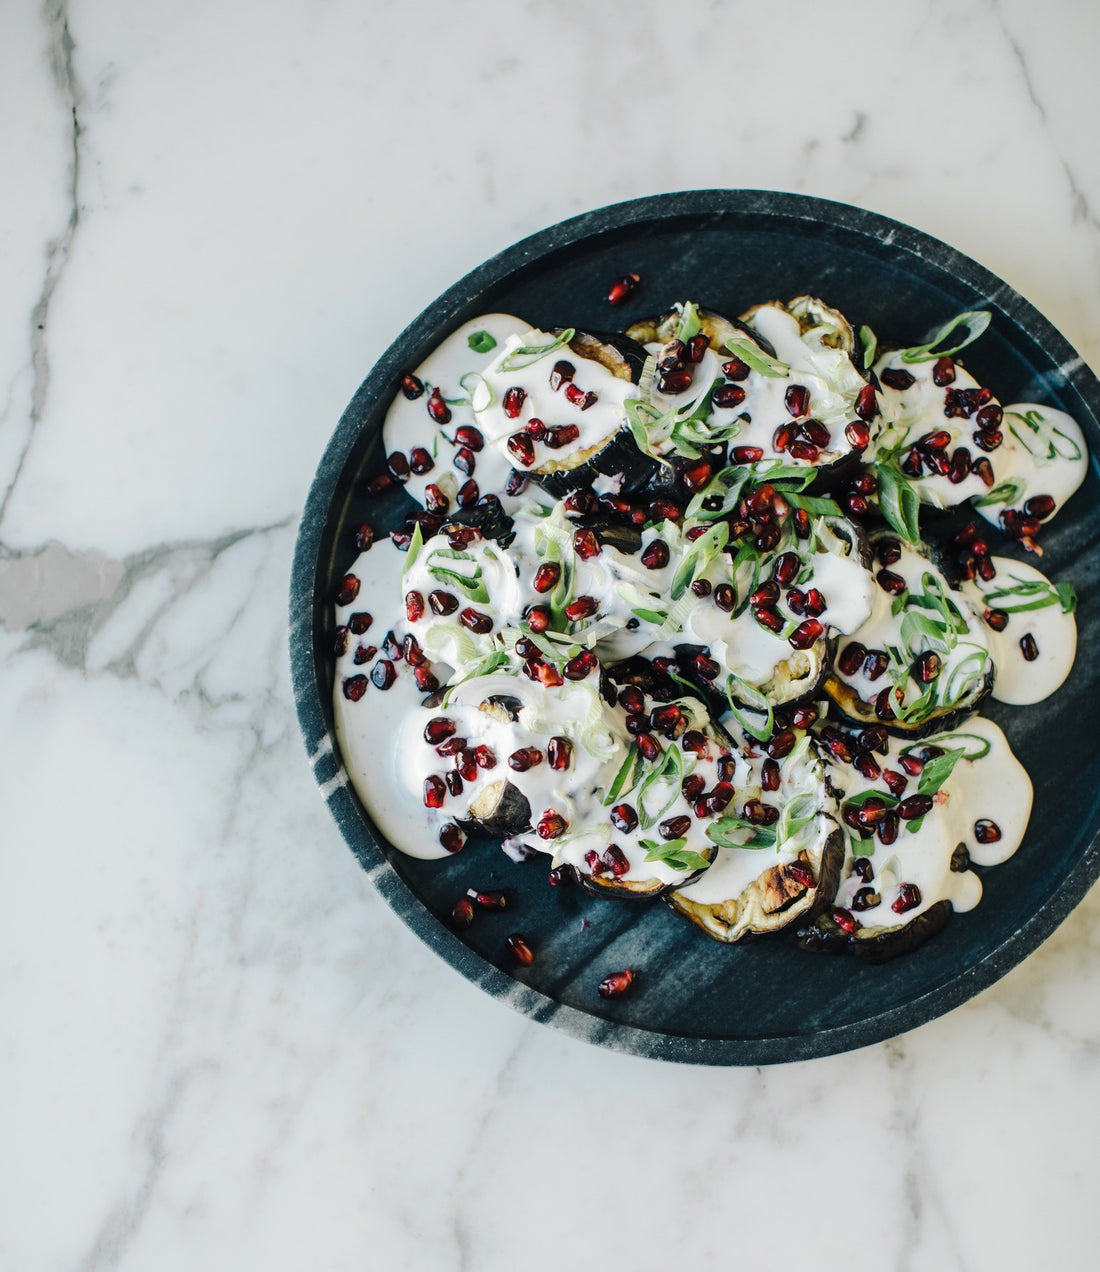 Grilled Aubergines with Tahini Sauce Recipe